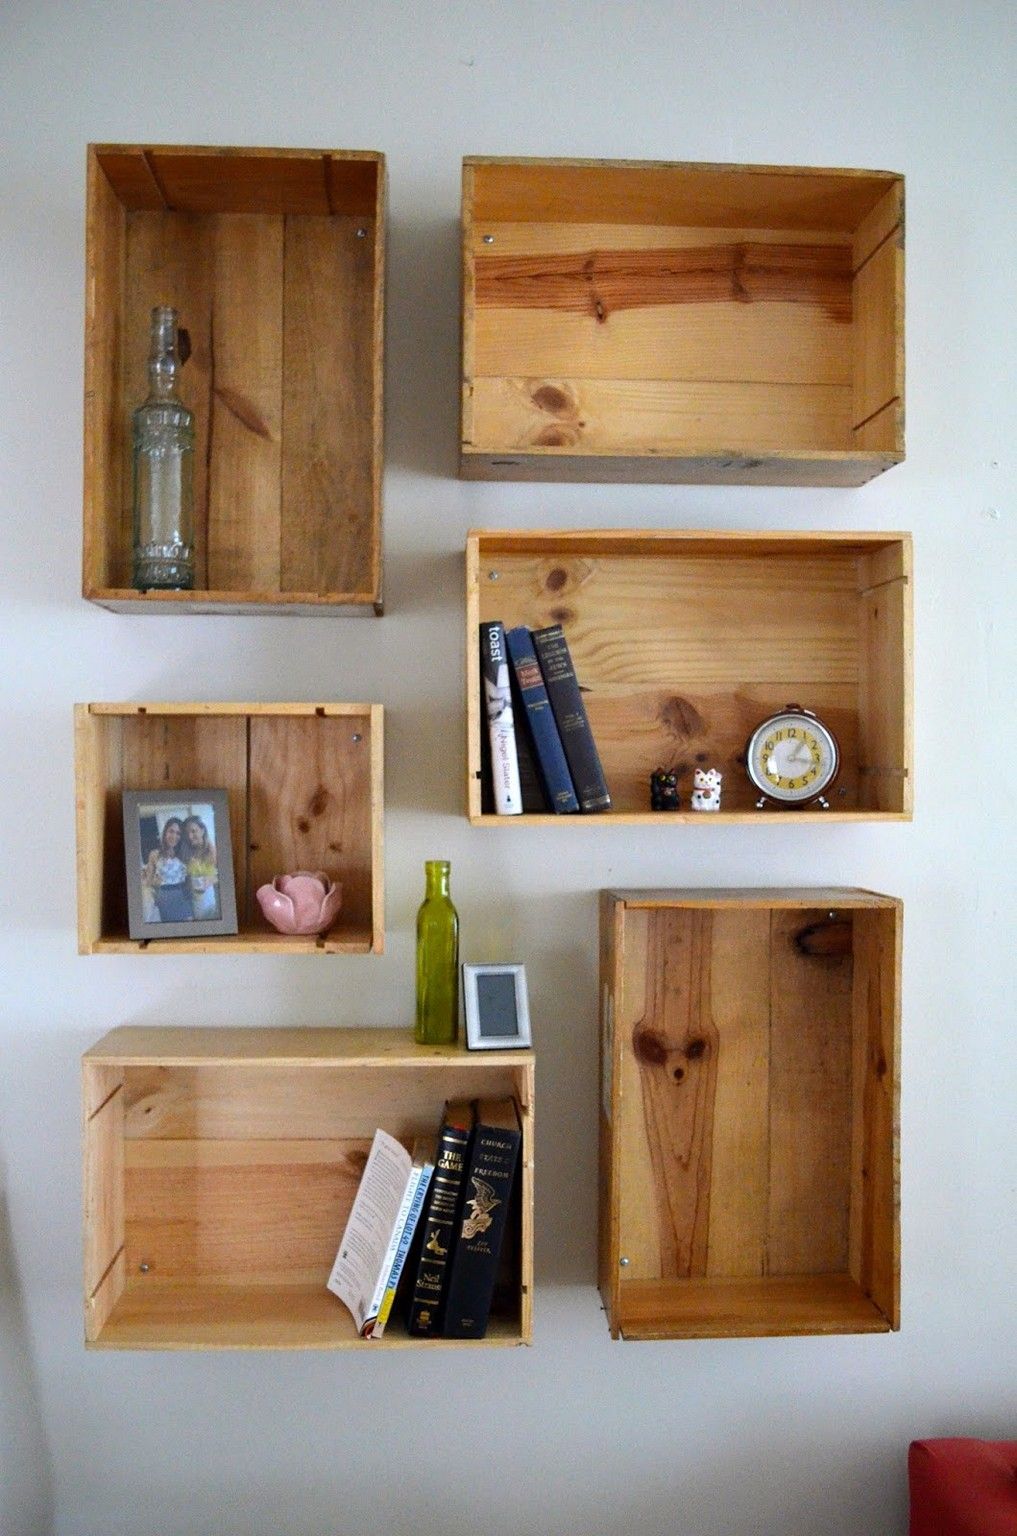 practical pretty shelving ideas reclaimed wood floating shelves box love when modernly styled room has couple rustic accents kids bookshelves wine wooden kitchen storage rack sink